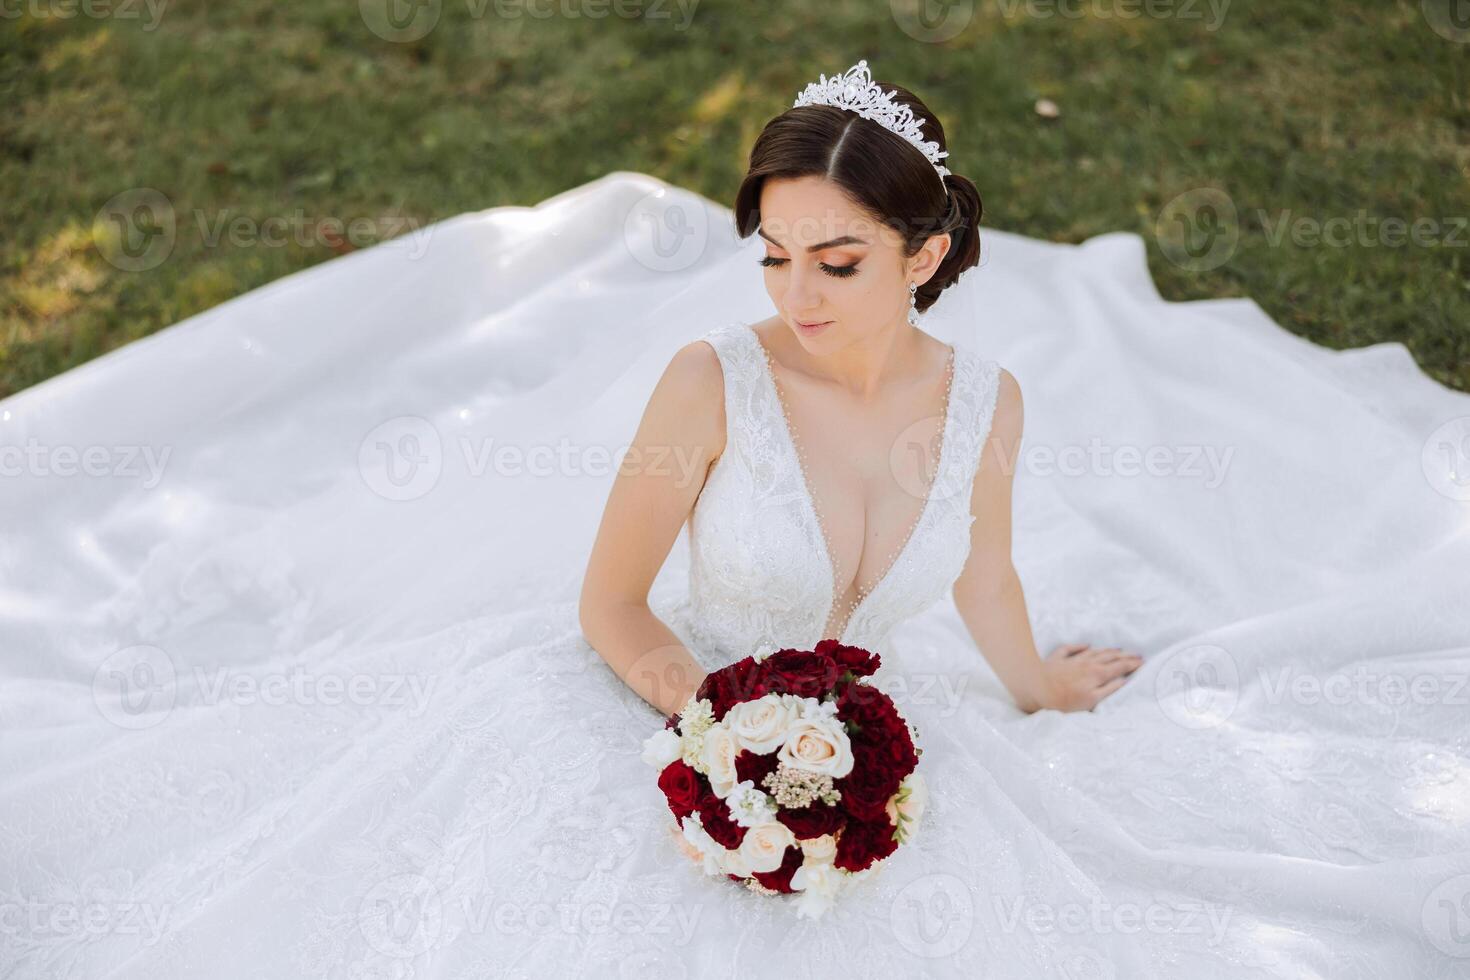 A brunette bride with a tiara in her hair, sitting on the ground in a dress unfolded in the shape of a circle, holding a bouquet. On a green background. Sunny day. Wedding ceremony photo